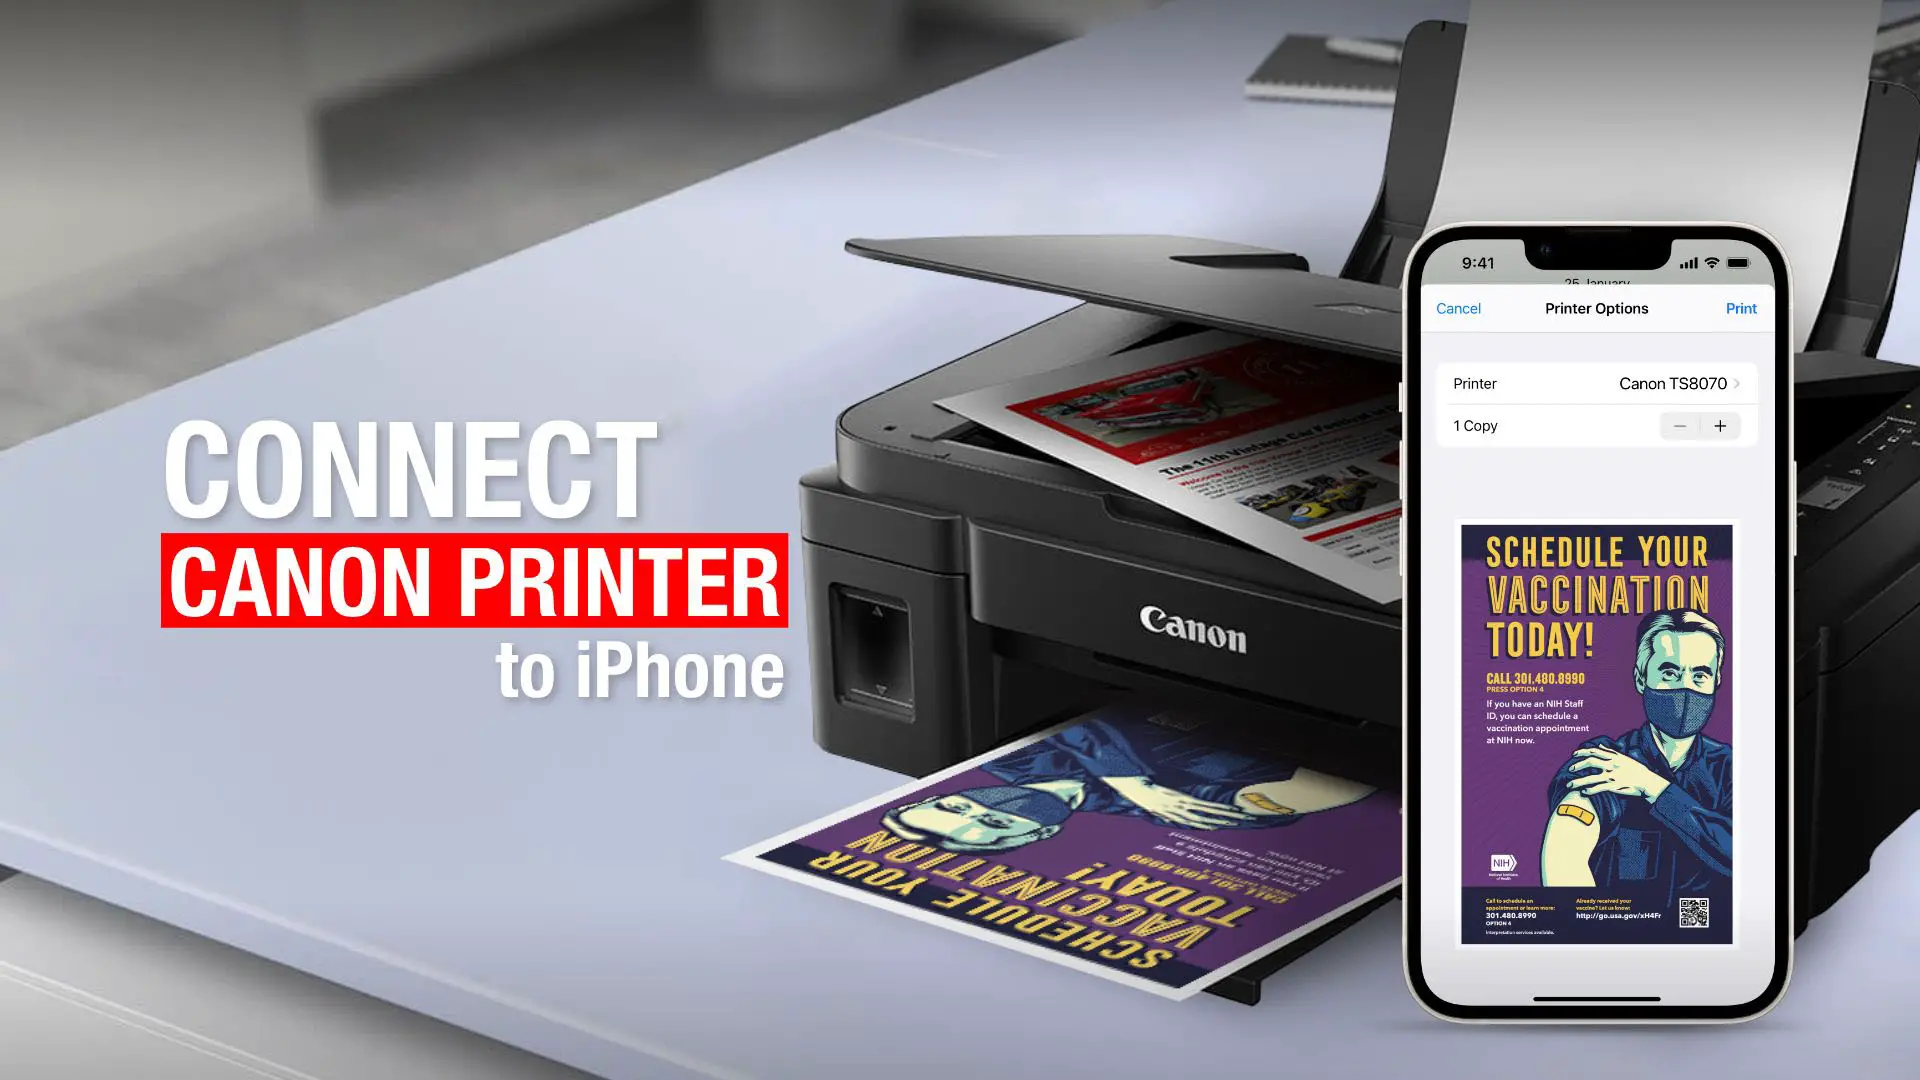 How to Connect Canon Printer to iPhone